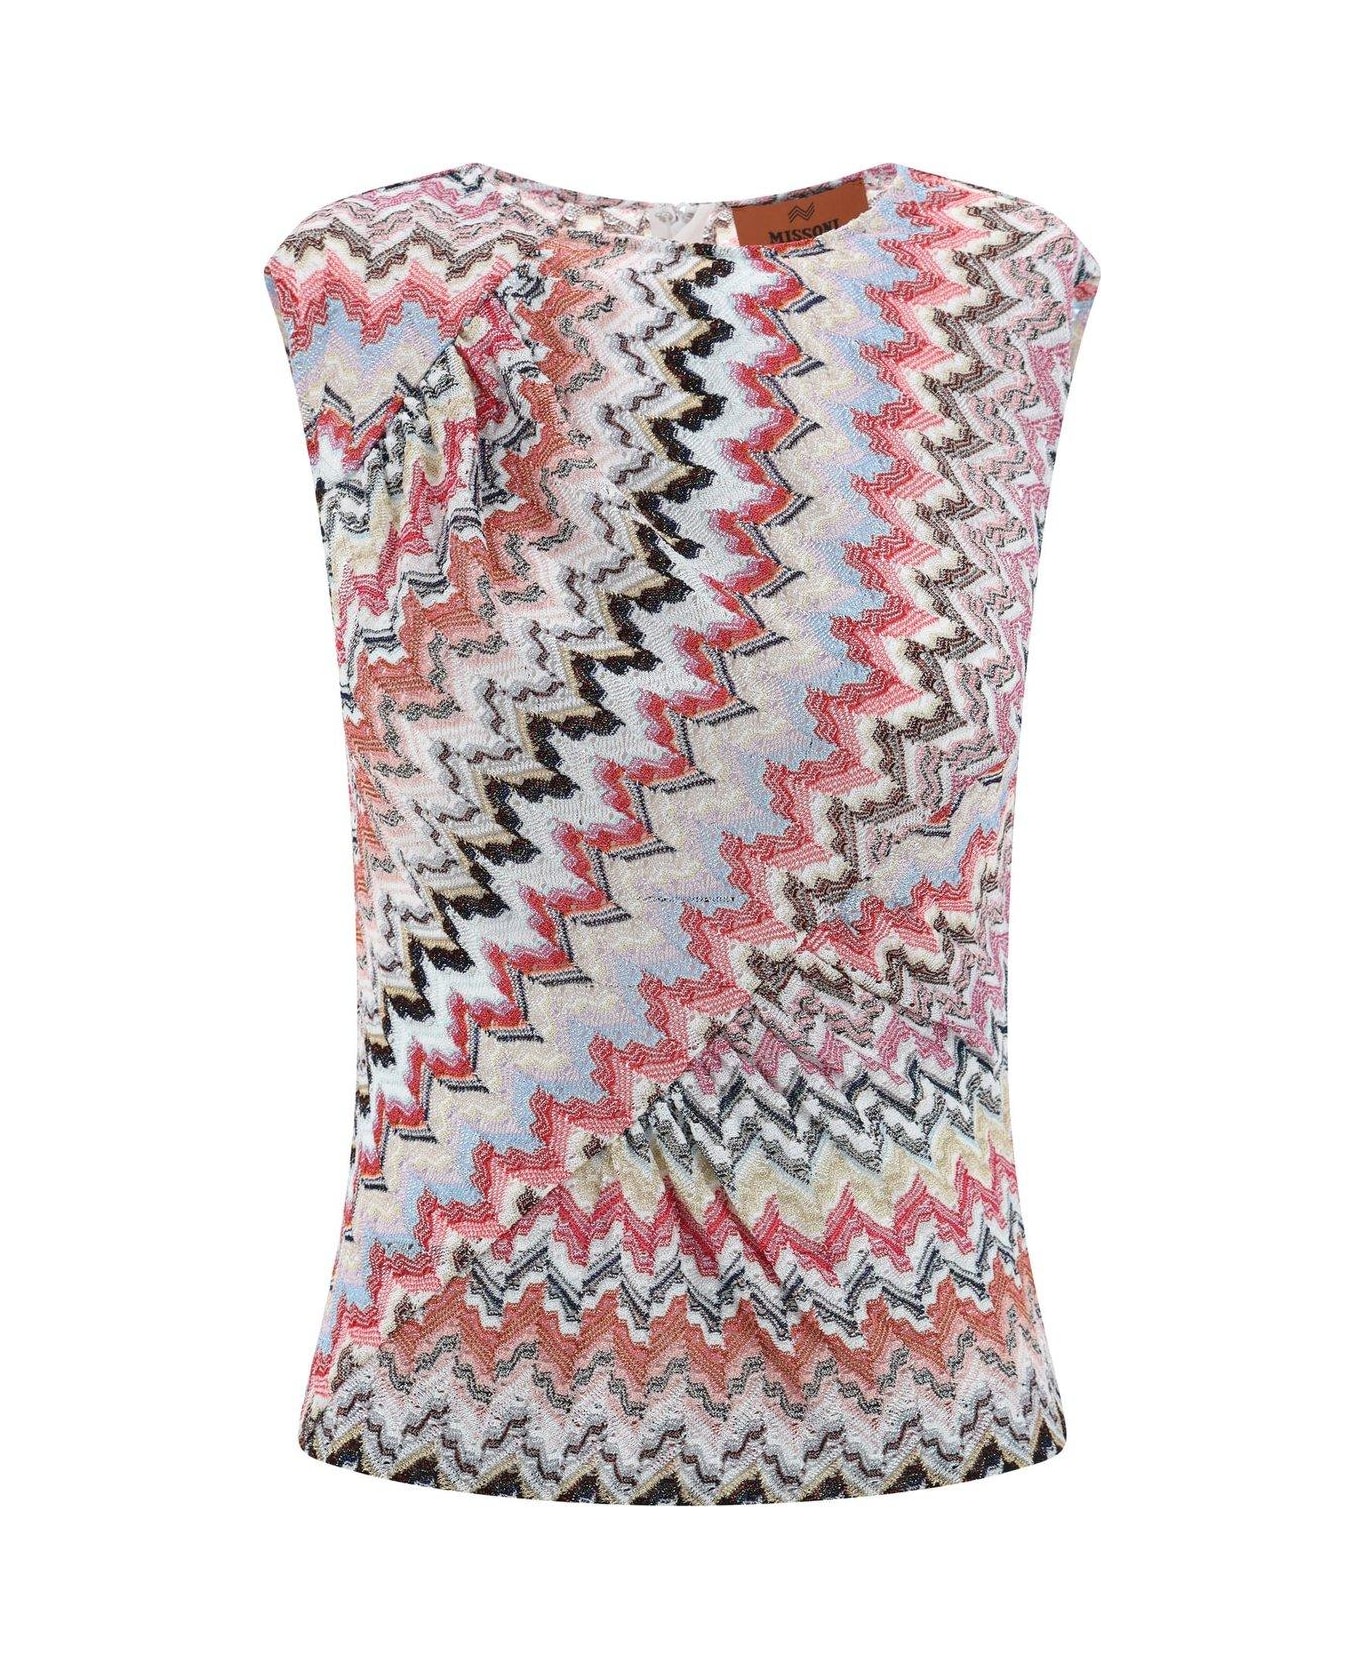 Missoni Zigzag Pattern Knitted Sleeveless Top - Pink Wht Tone Multic